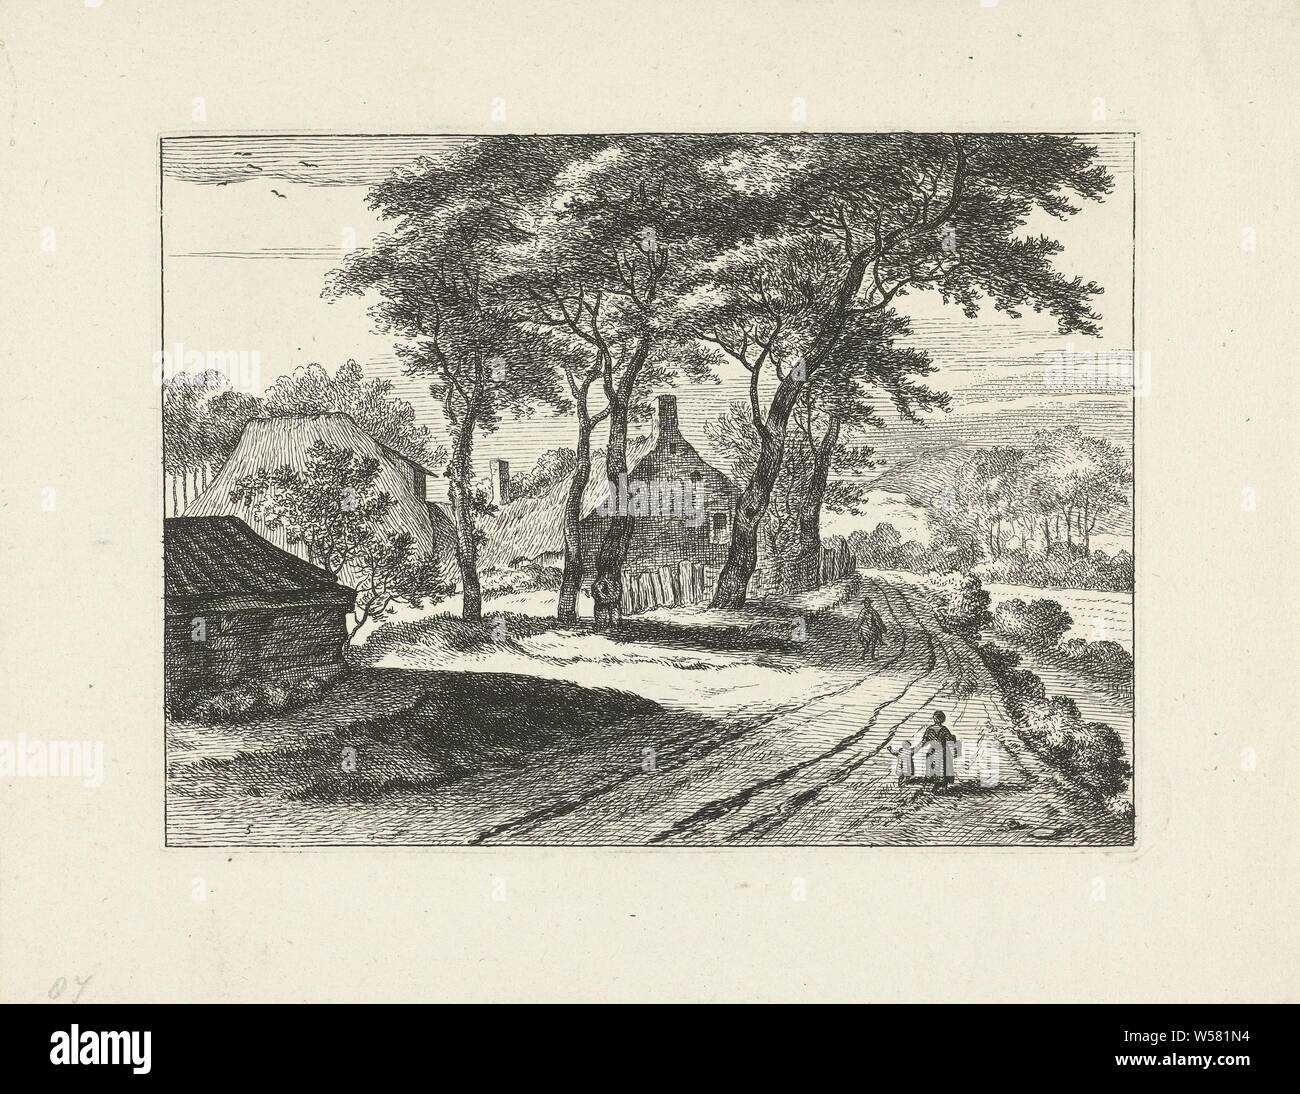 Forest landscape with farms Landscapes (series title), Forest landscape with farm. Front right a country road with mother and child. A man rider meets them. Fifth print from a series of six with landscapes., Landscapes (landscape with figures, staffage), mother and baby or young child, Johannes Gronsveld, Amsterdam, 1679 - 1728, paper, engraving, h 145 mm × w 198 mm Stock Photo